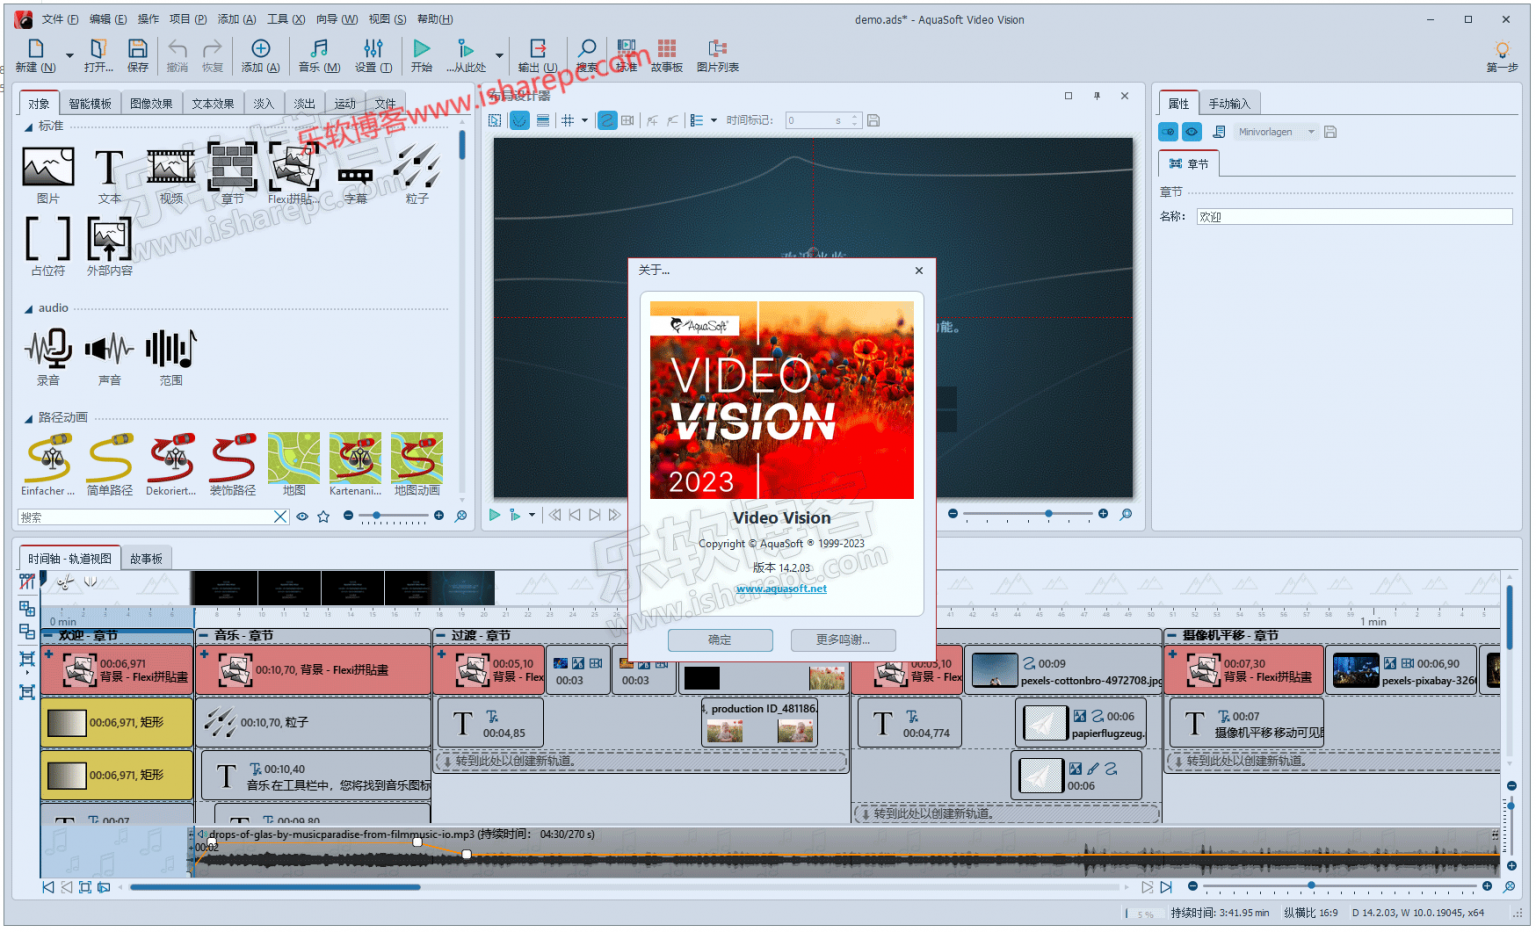 AquaSoft Video Vision 14.2.11 download the last version for apple